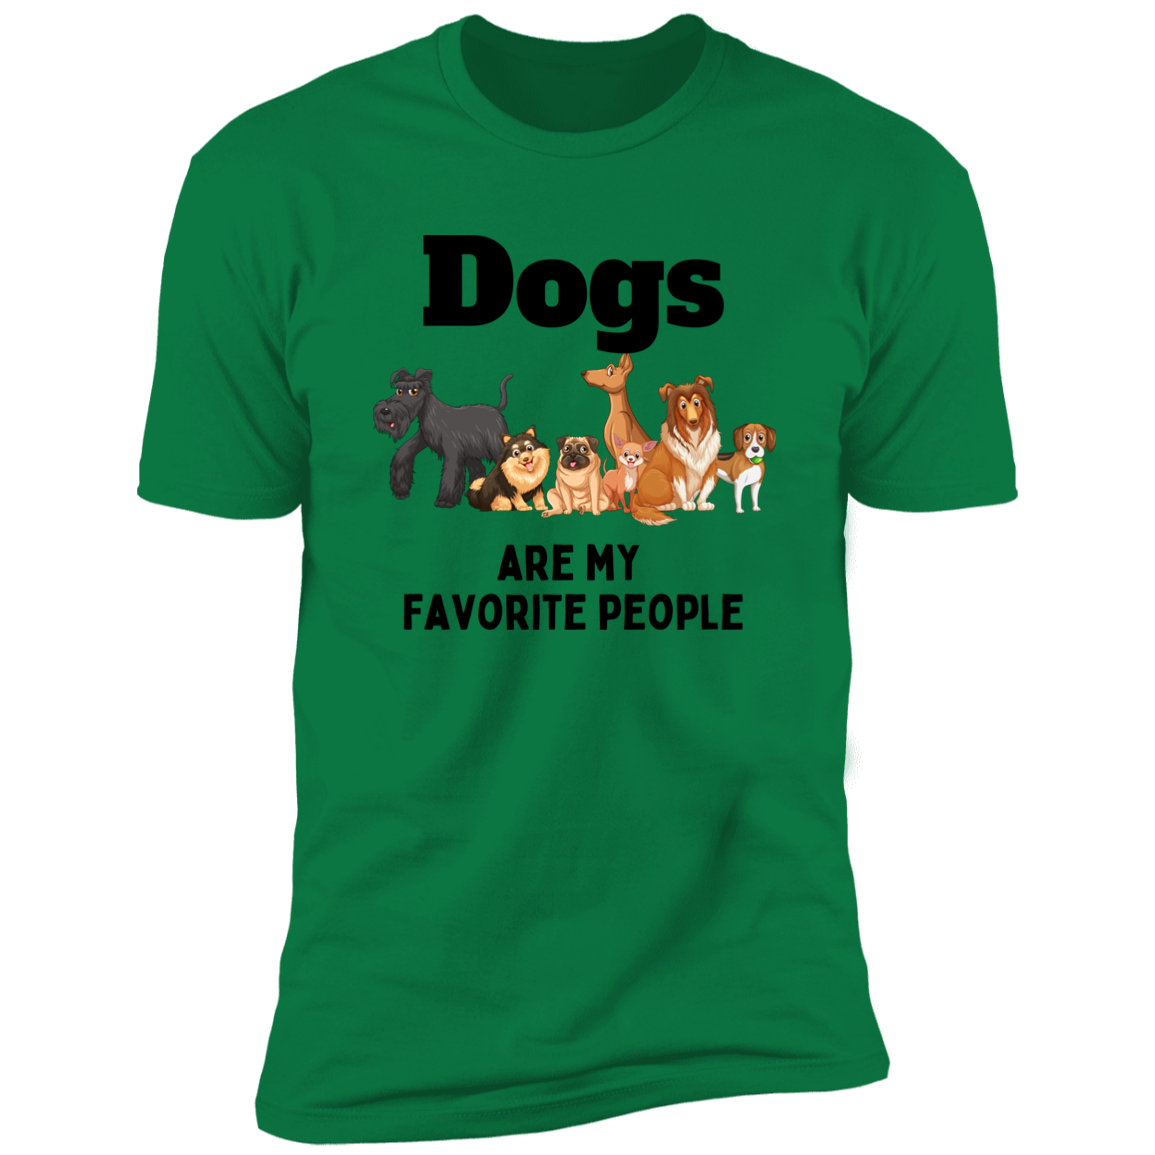 Dogs Are My Favorite People t-shirt, dog shirt for humans, in kelly green